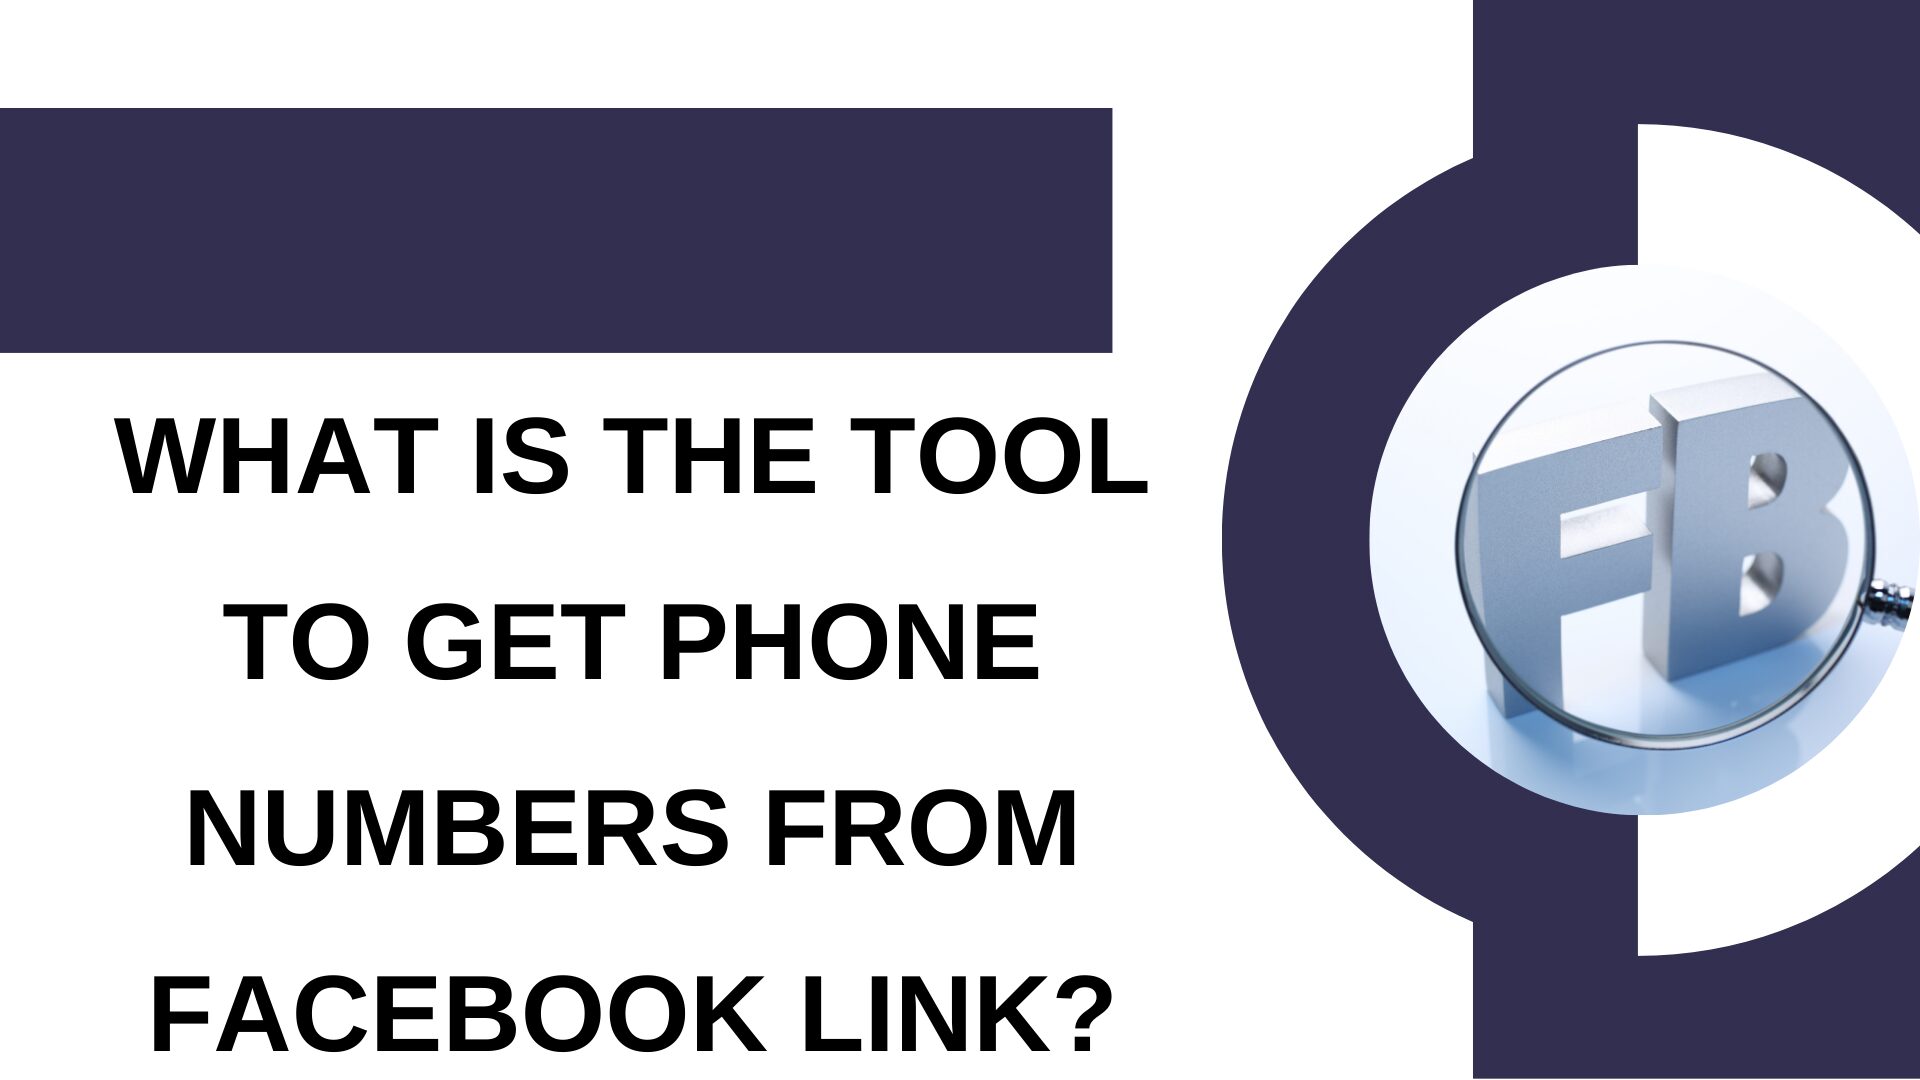 What are the tools to get phone numbers from Facebook Links?